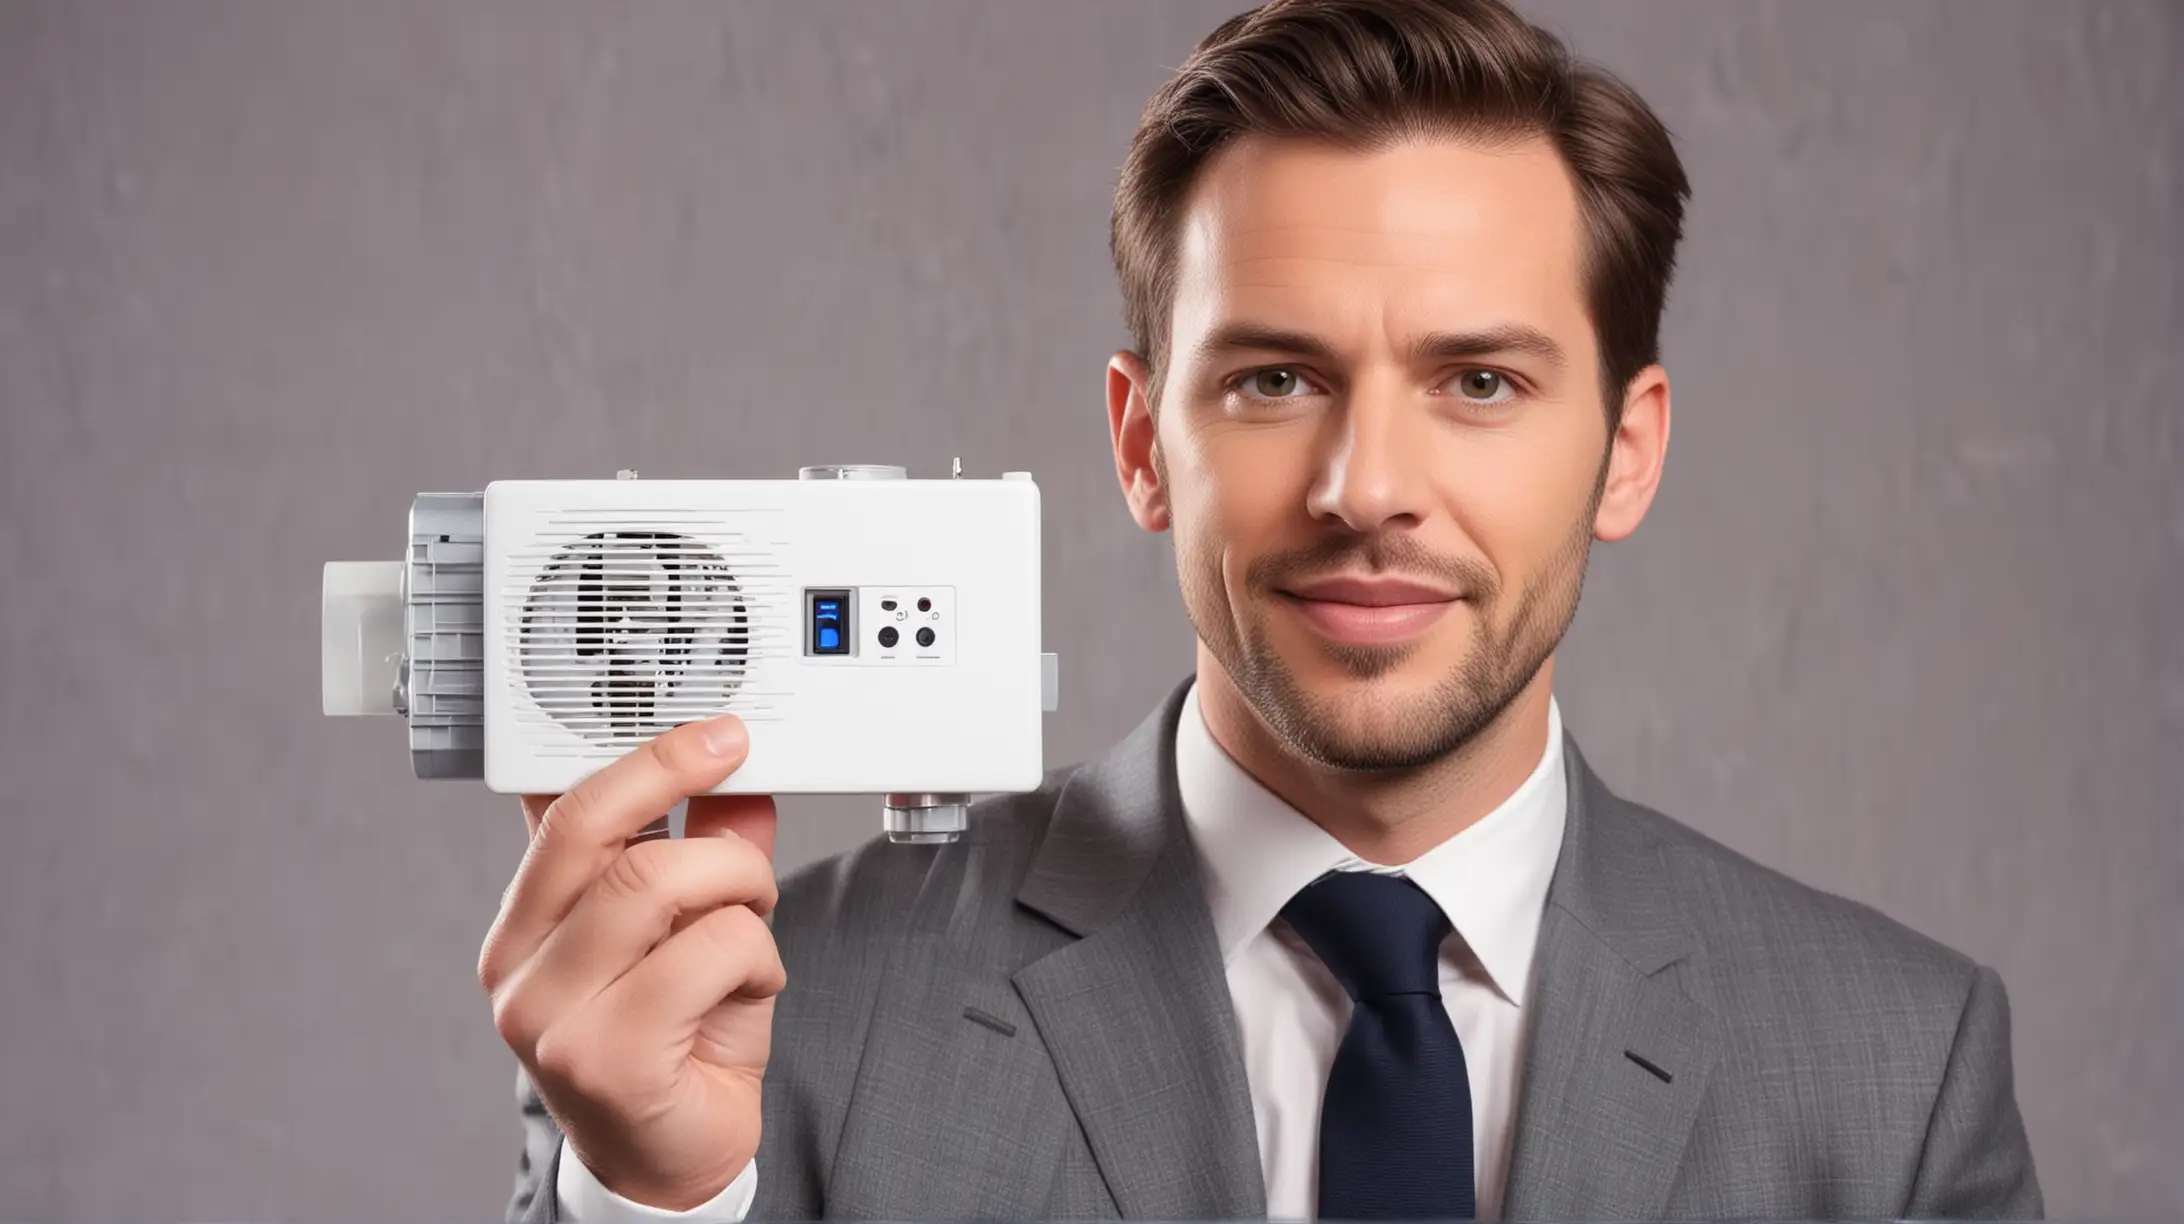 Attractive white man tv host holding small air ionizer. On talk show set. Close up